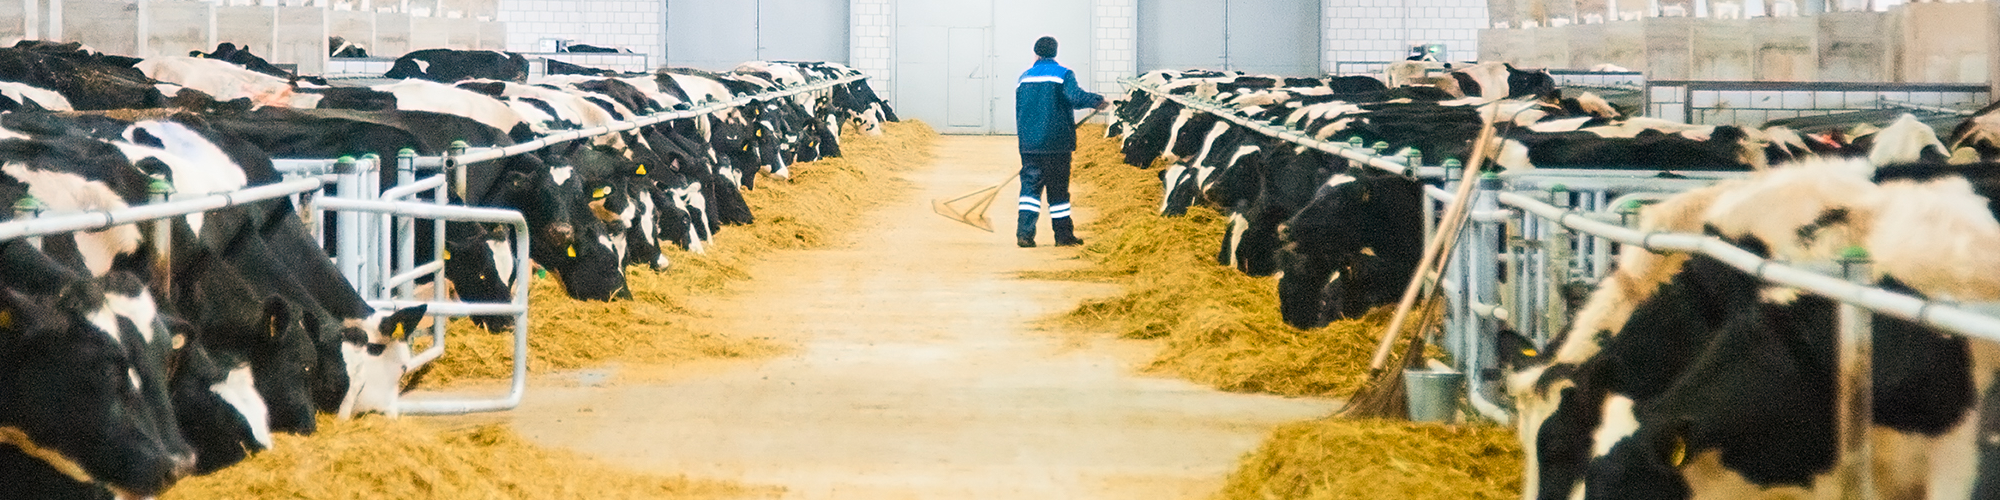 Metabolizable Protein in Dairy Barn